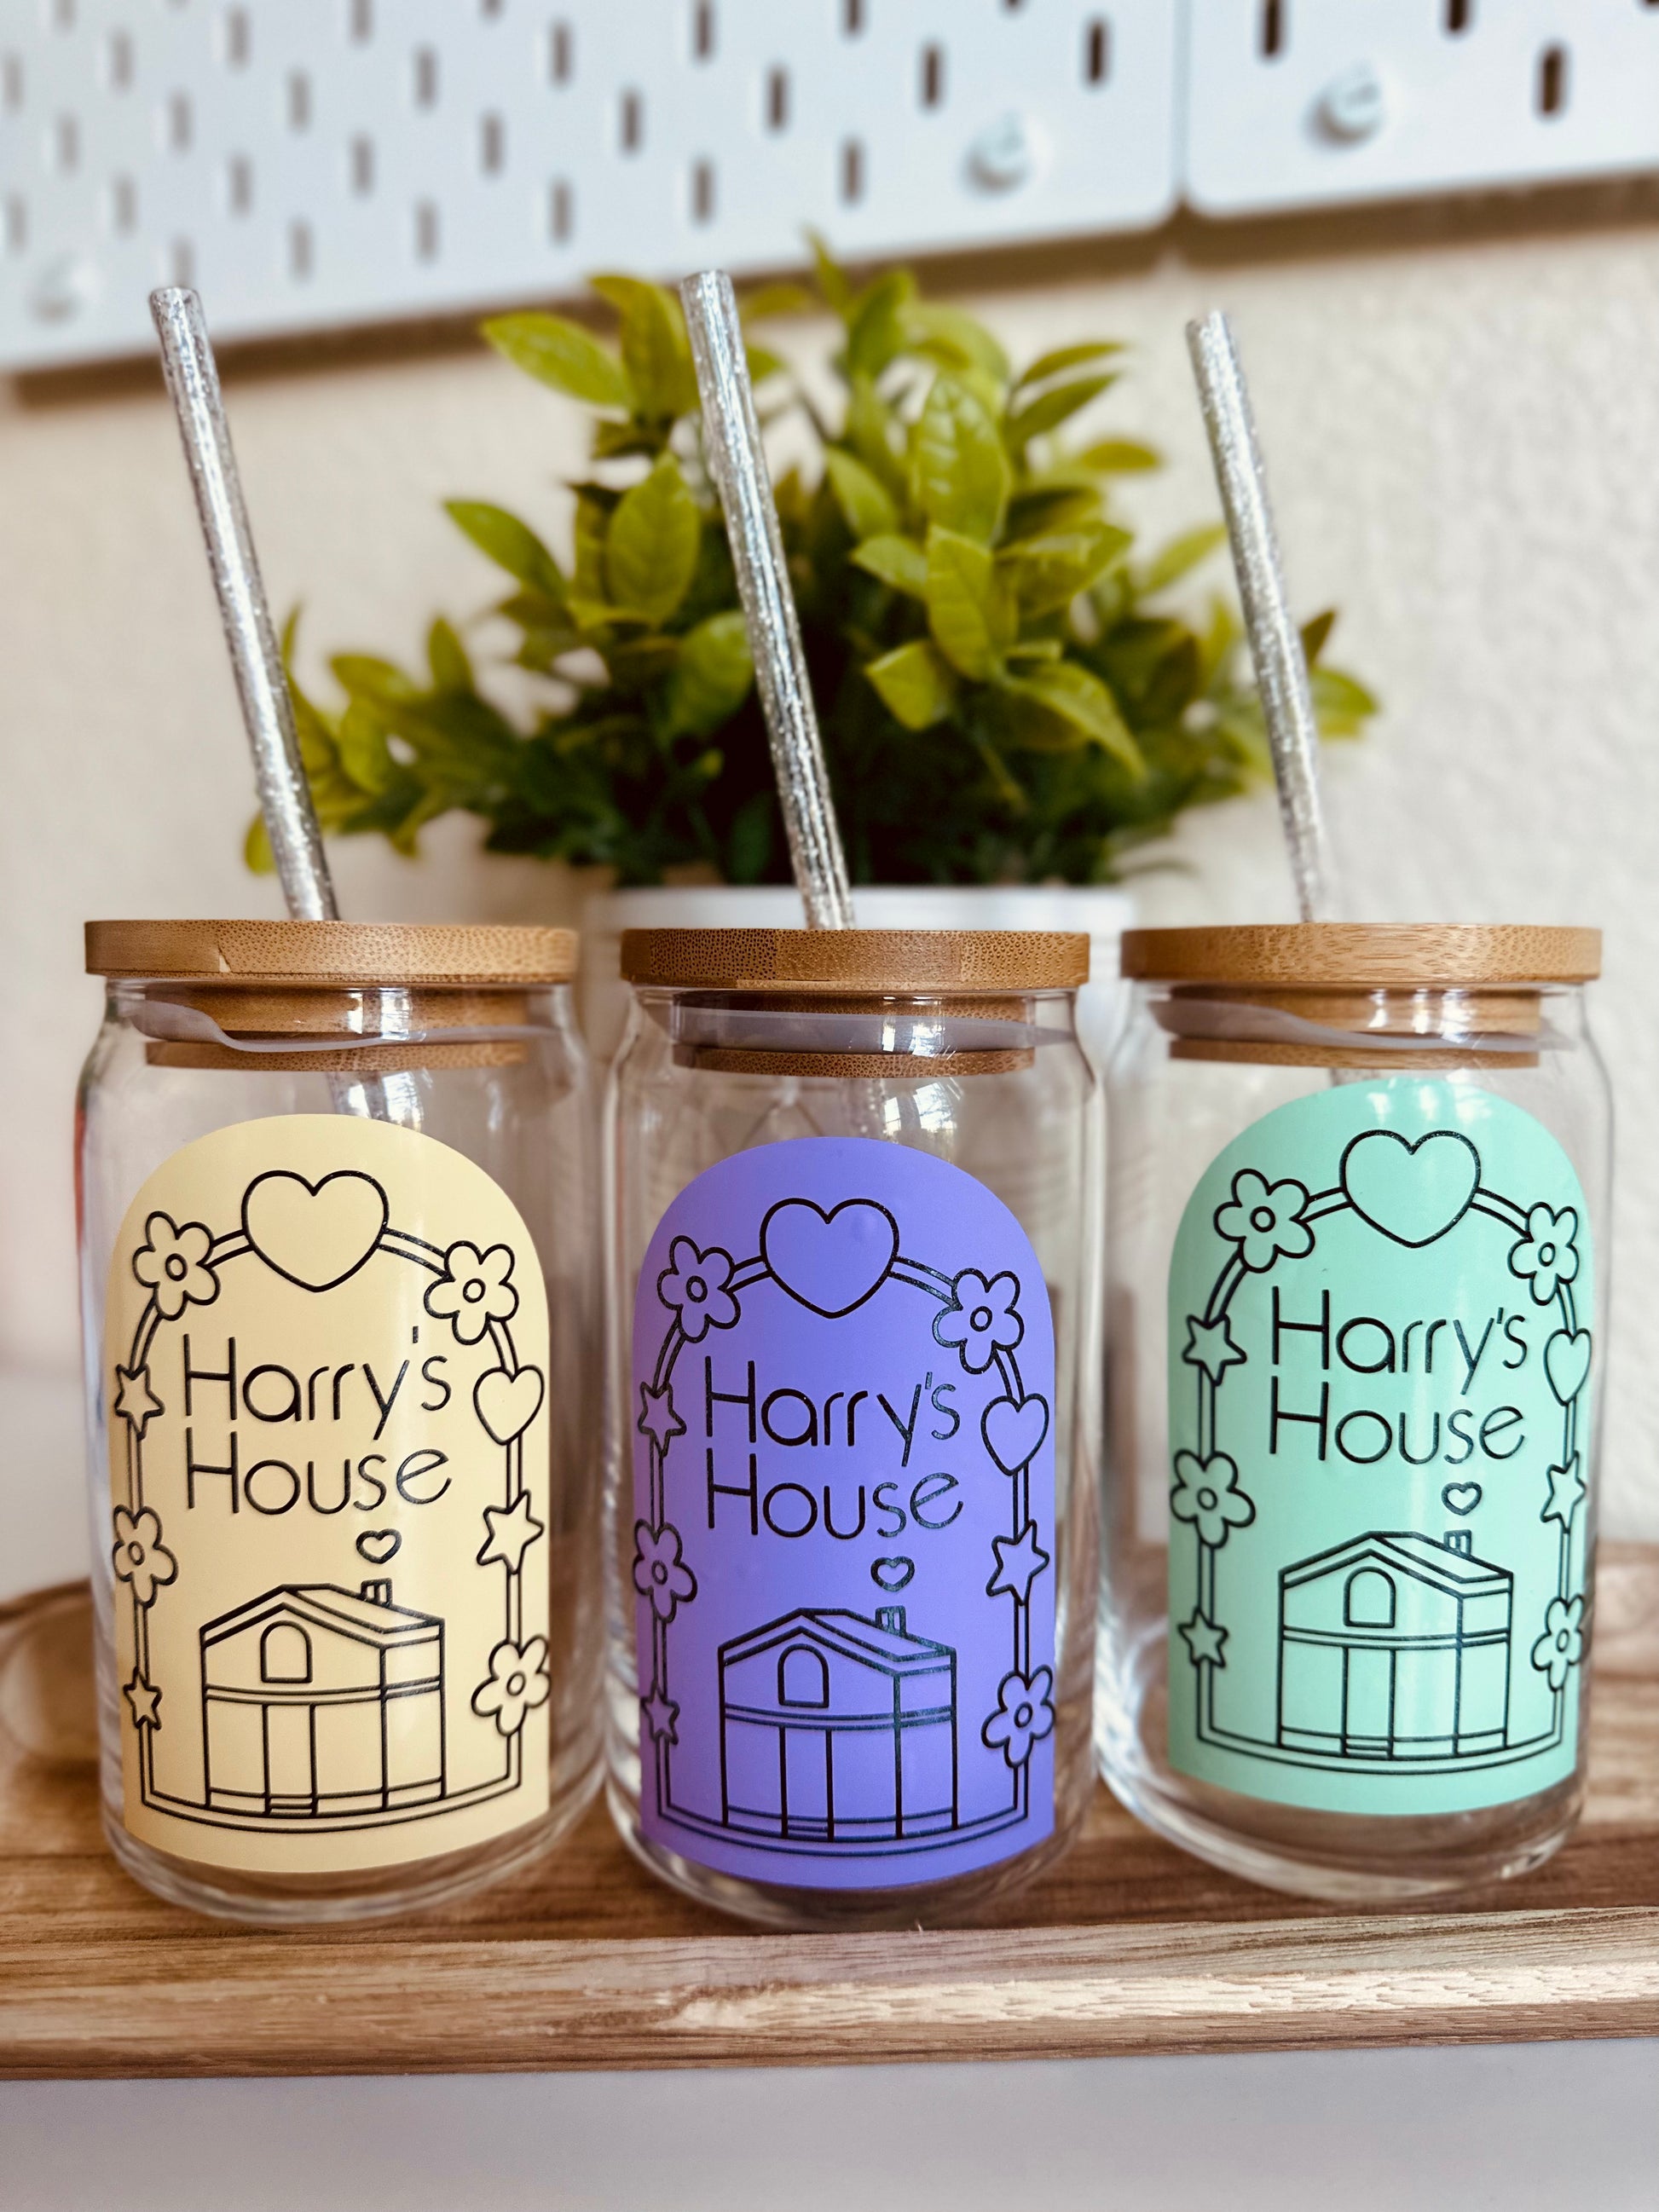 Harry Styles Cup I Harry's House